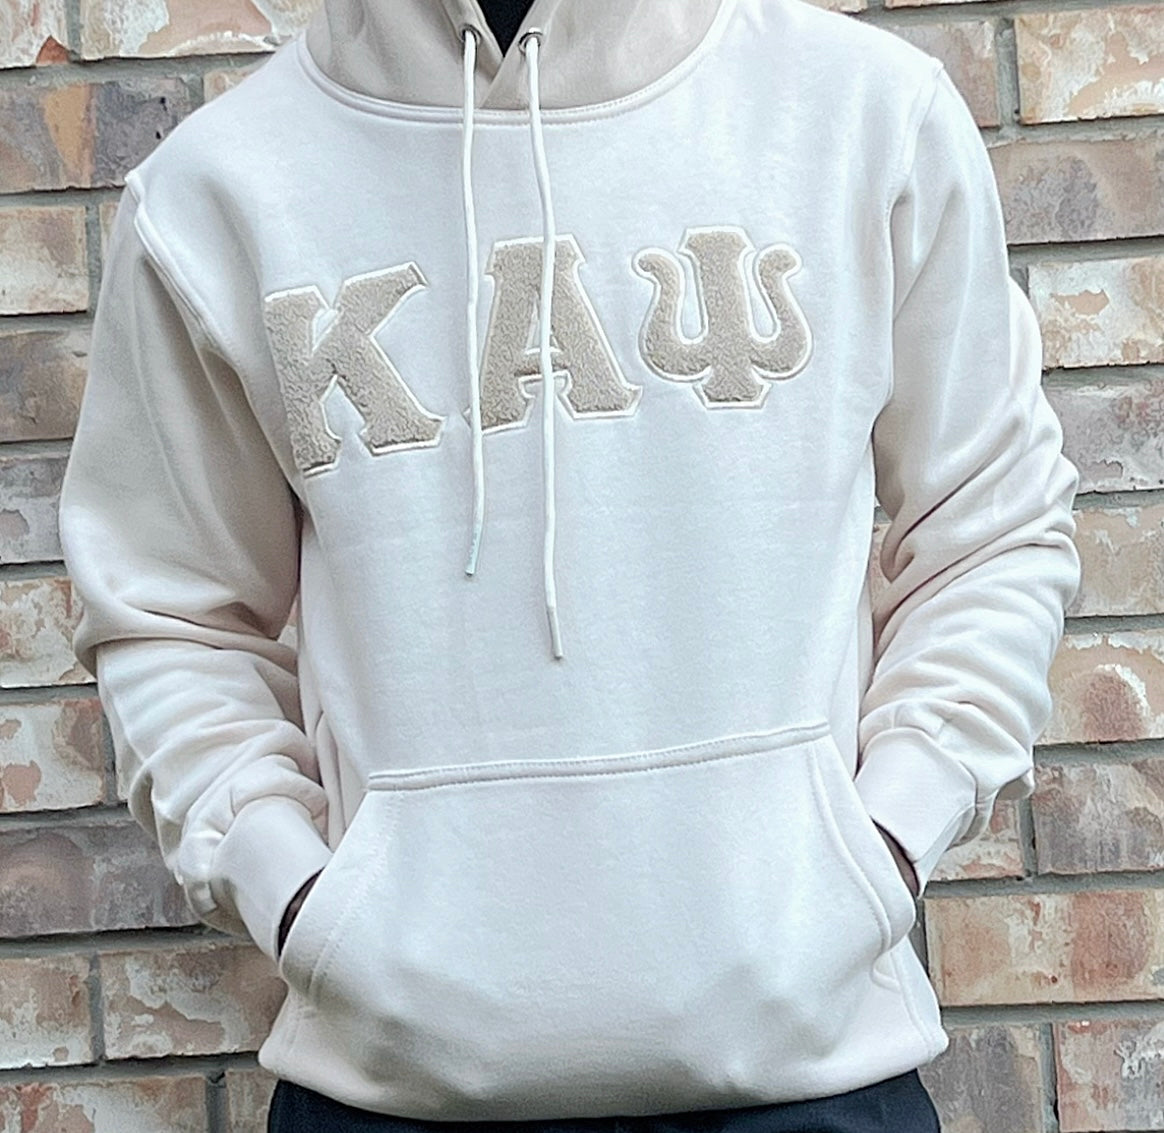 Exclusive Kappa Alpha Psi Chenille Embroidery Lettered Hoodie. This is the perfect long-sleeved hoodie to wear while showing off your Kappa Alpha Psi fraternity lettering. A comfortable 100% cotton tee with a twill Greek letters embroidery across the chest give you the perfect fit. This hoodie is also a perfect gift or your favorite Kappa Man.